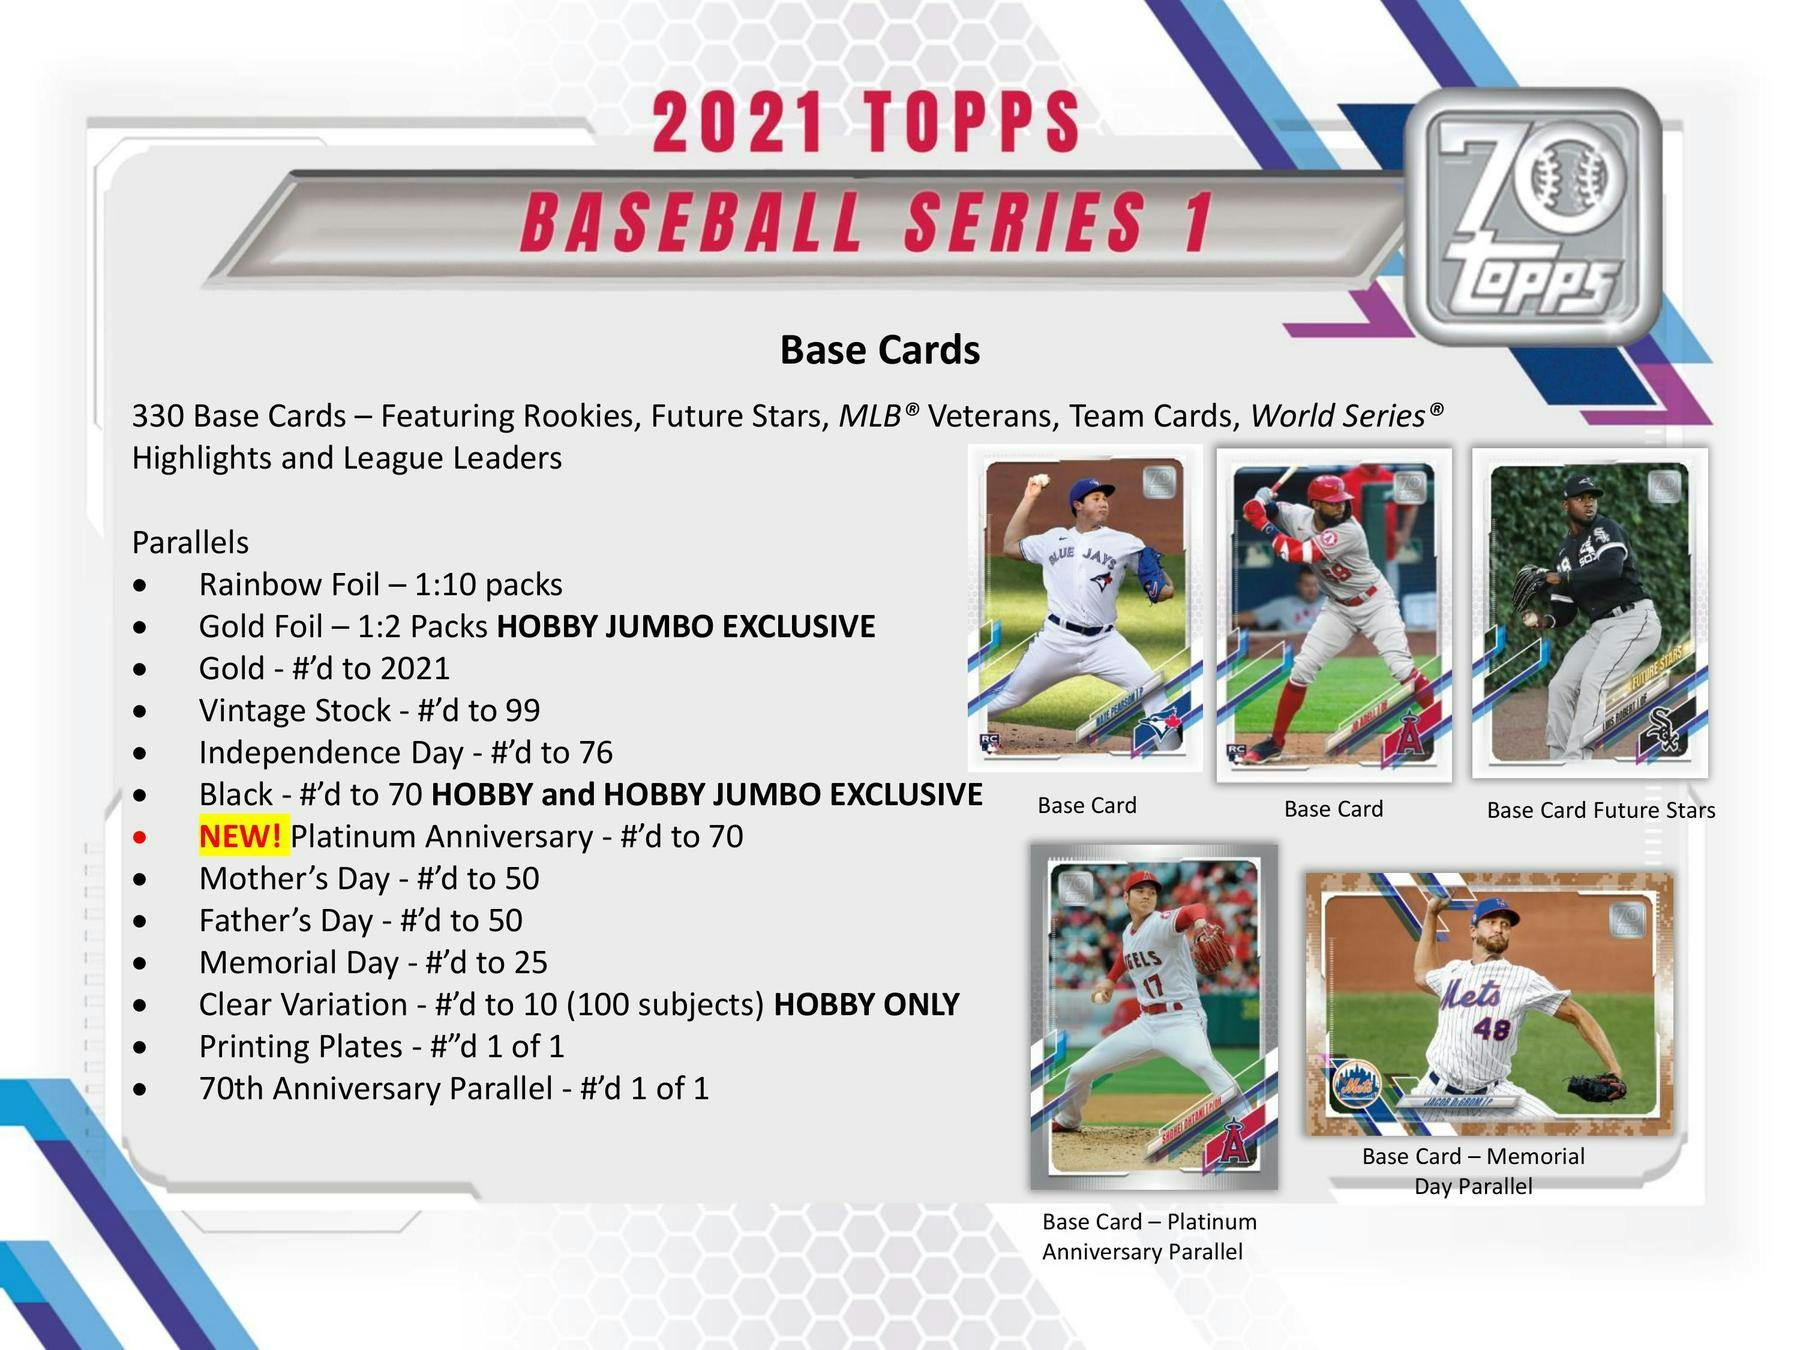 Frank's Cards Oakland Athletics/Complete 2021 Topps Baseball Team Set  (Series 1) with (11) Cards. ***PLUS (10) Bonus A's Cards 2020/2019***